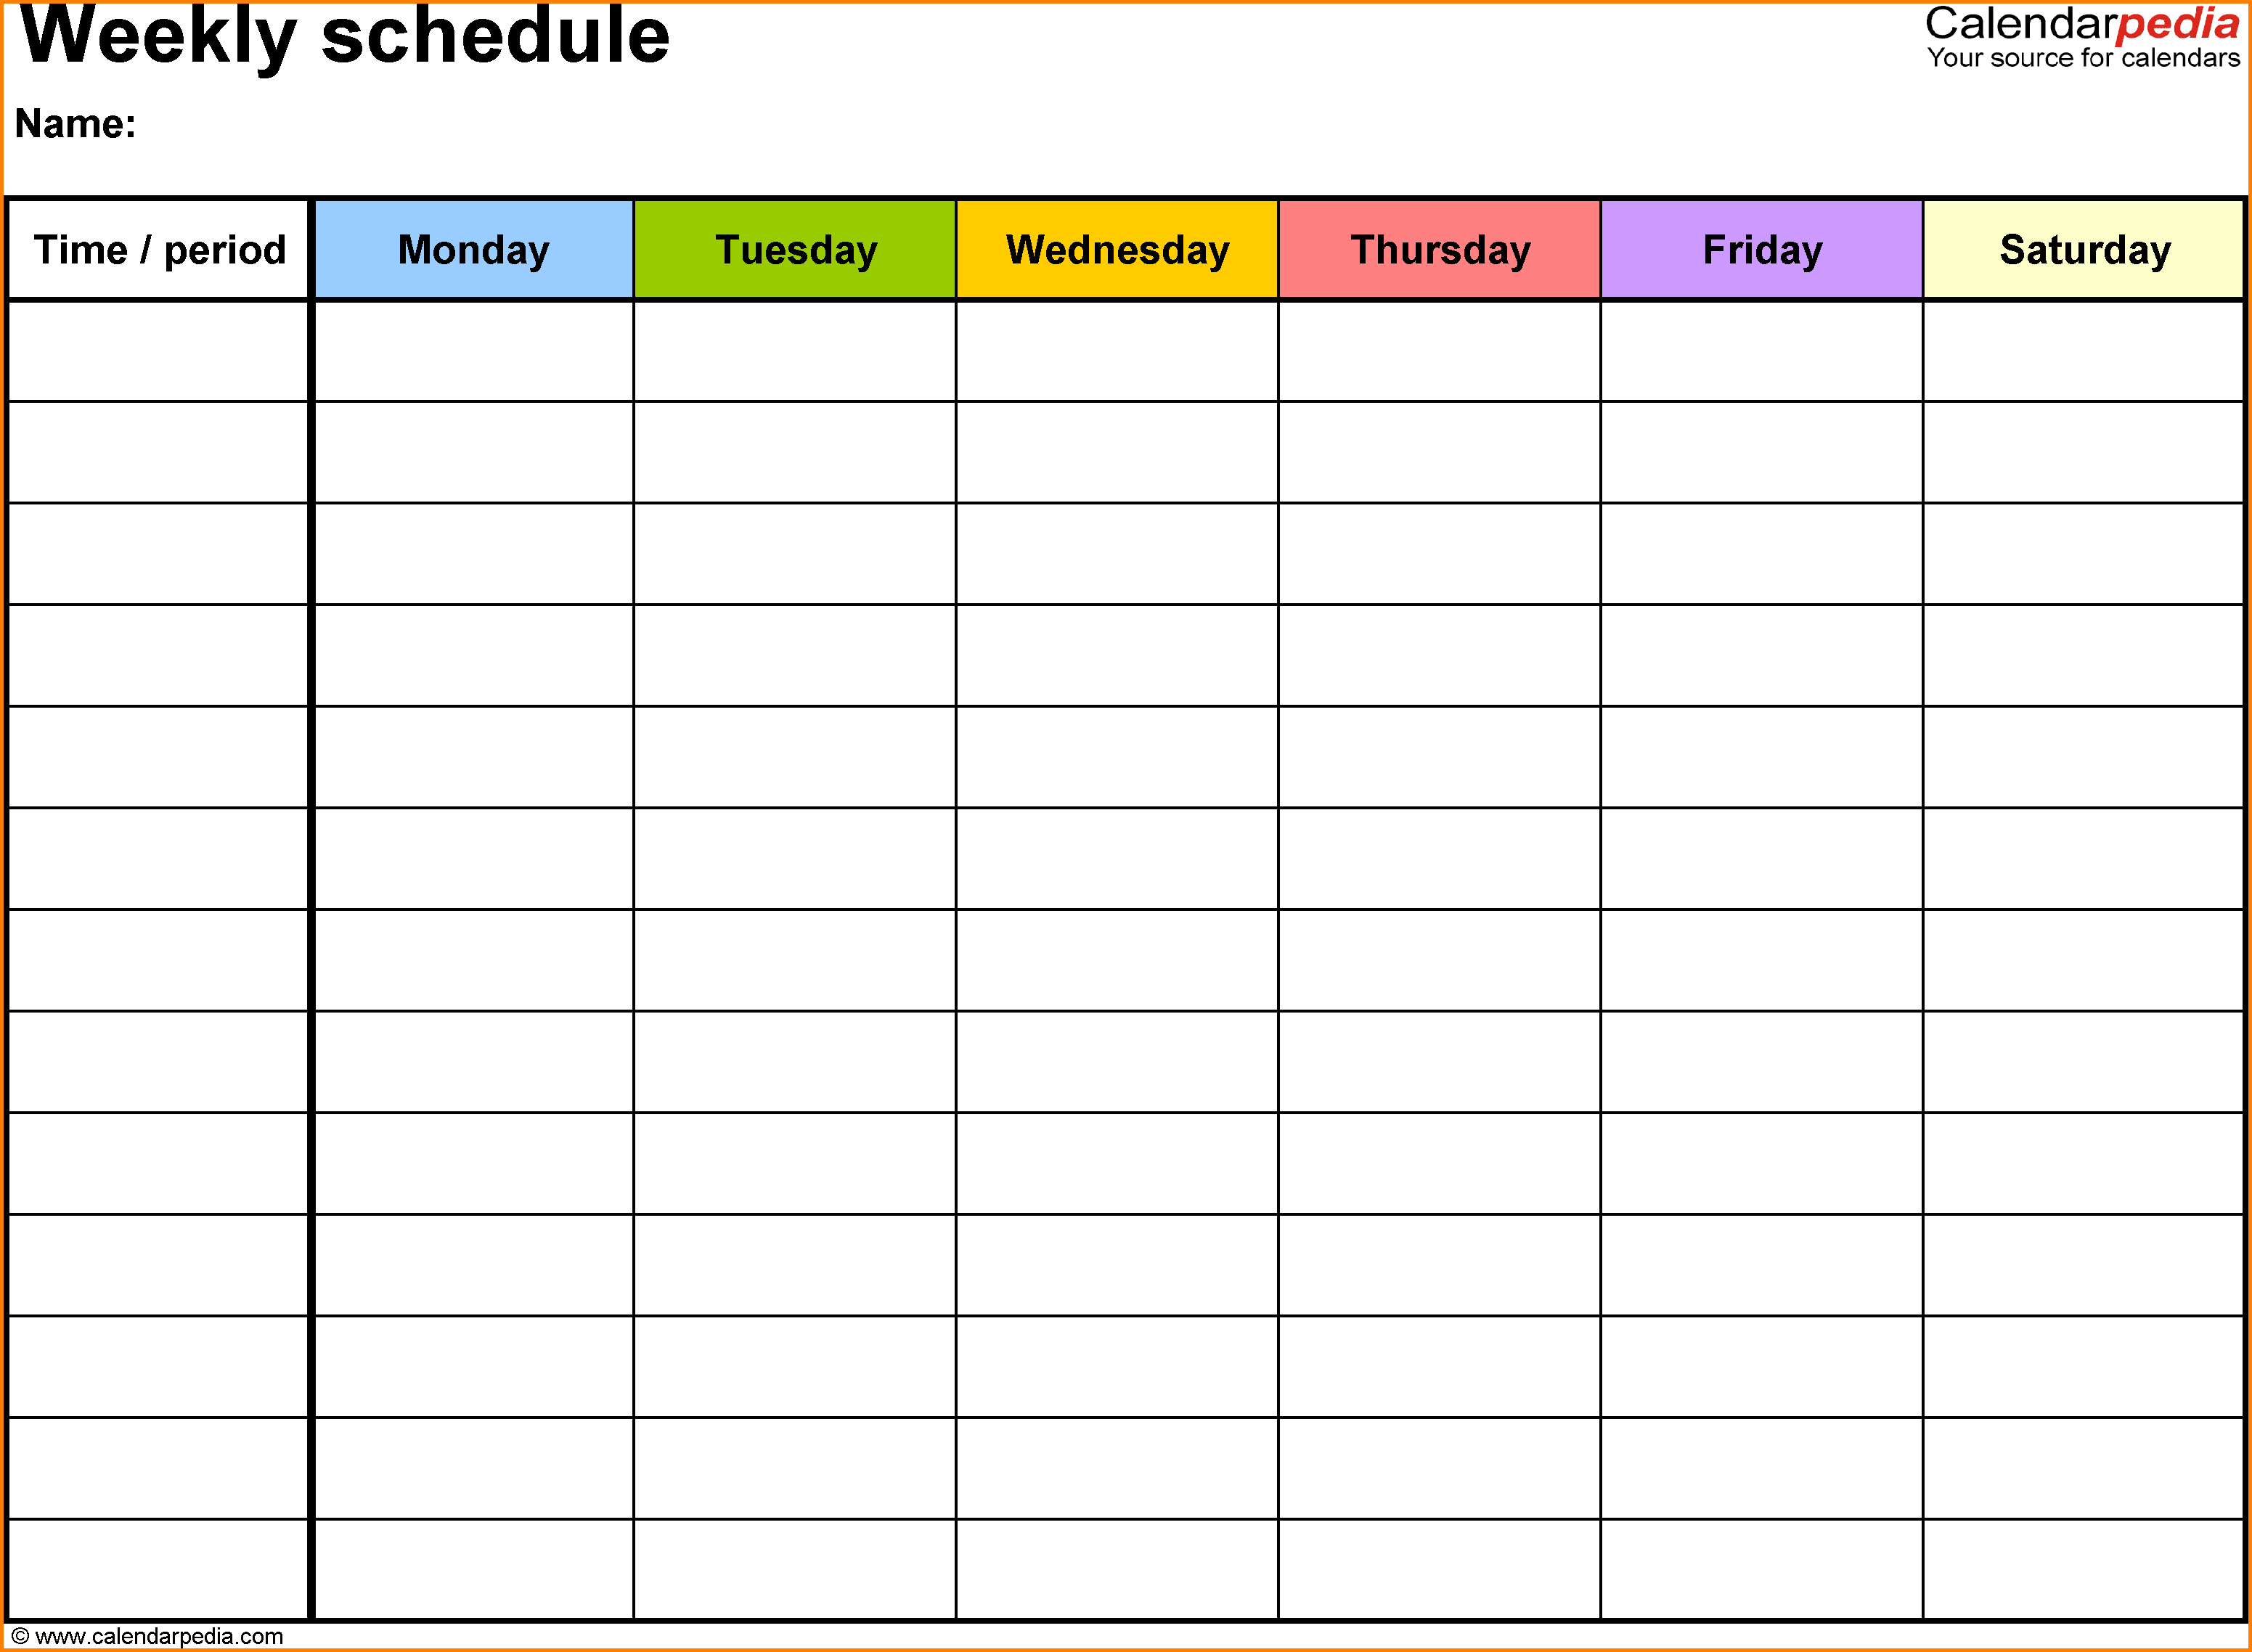 School Schedule Templates.weekly Schedule Word.png - Timetable, Transparent background PNG HD thumbnail